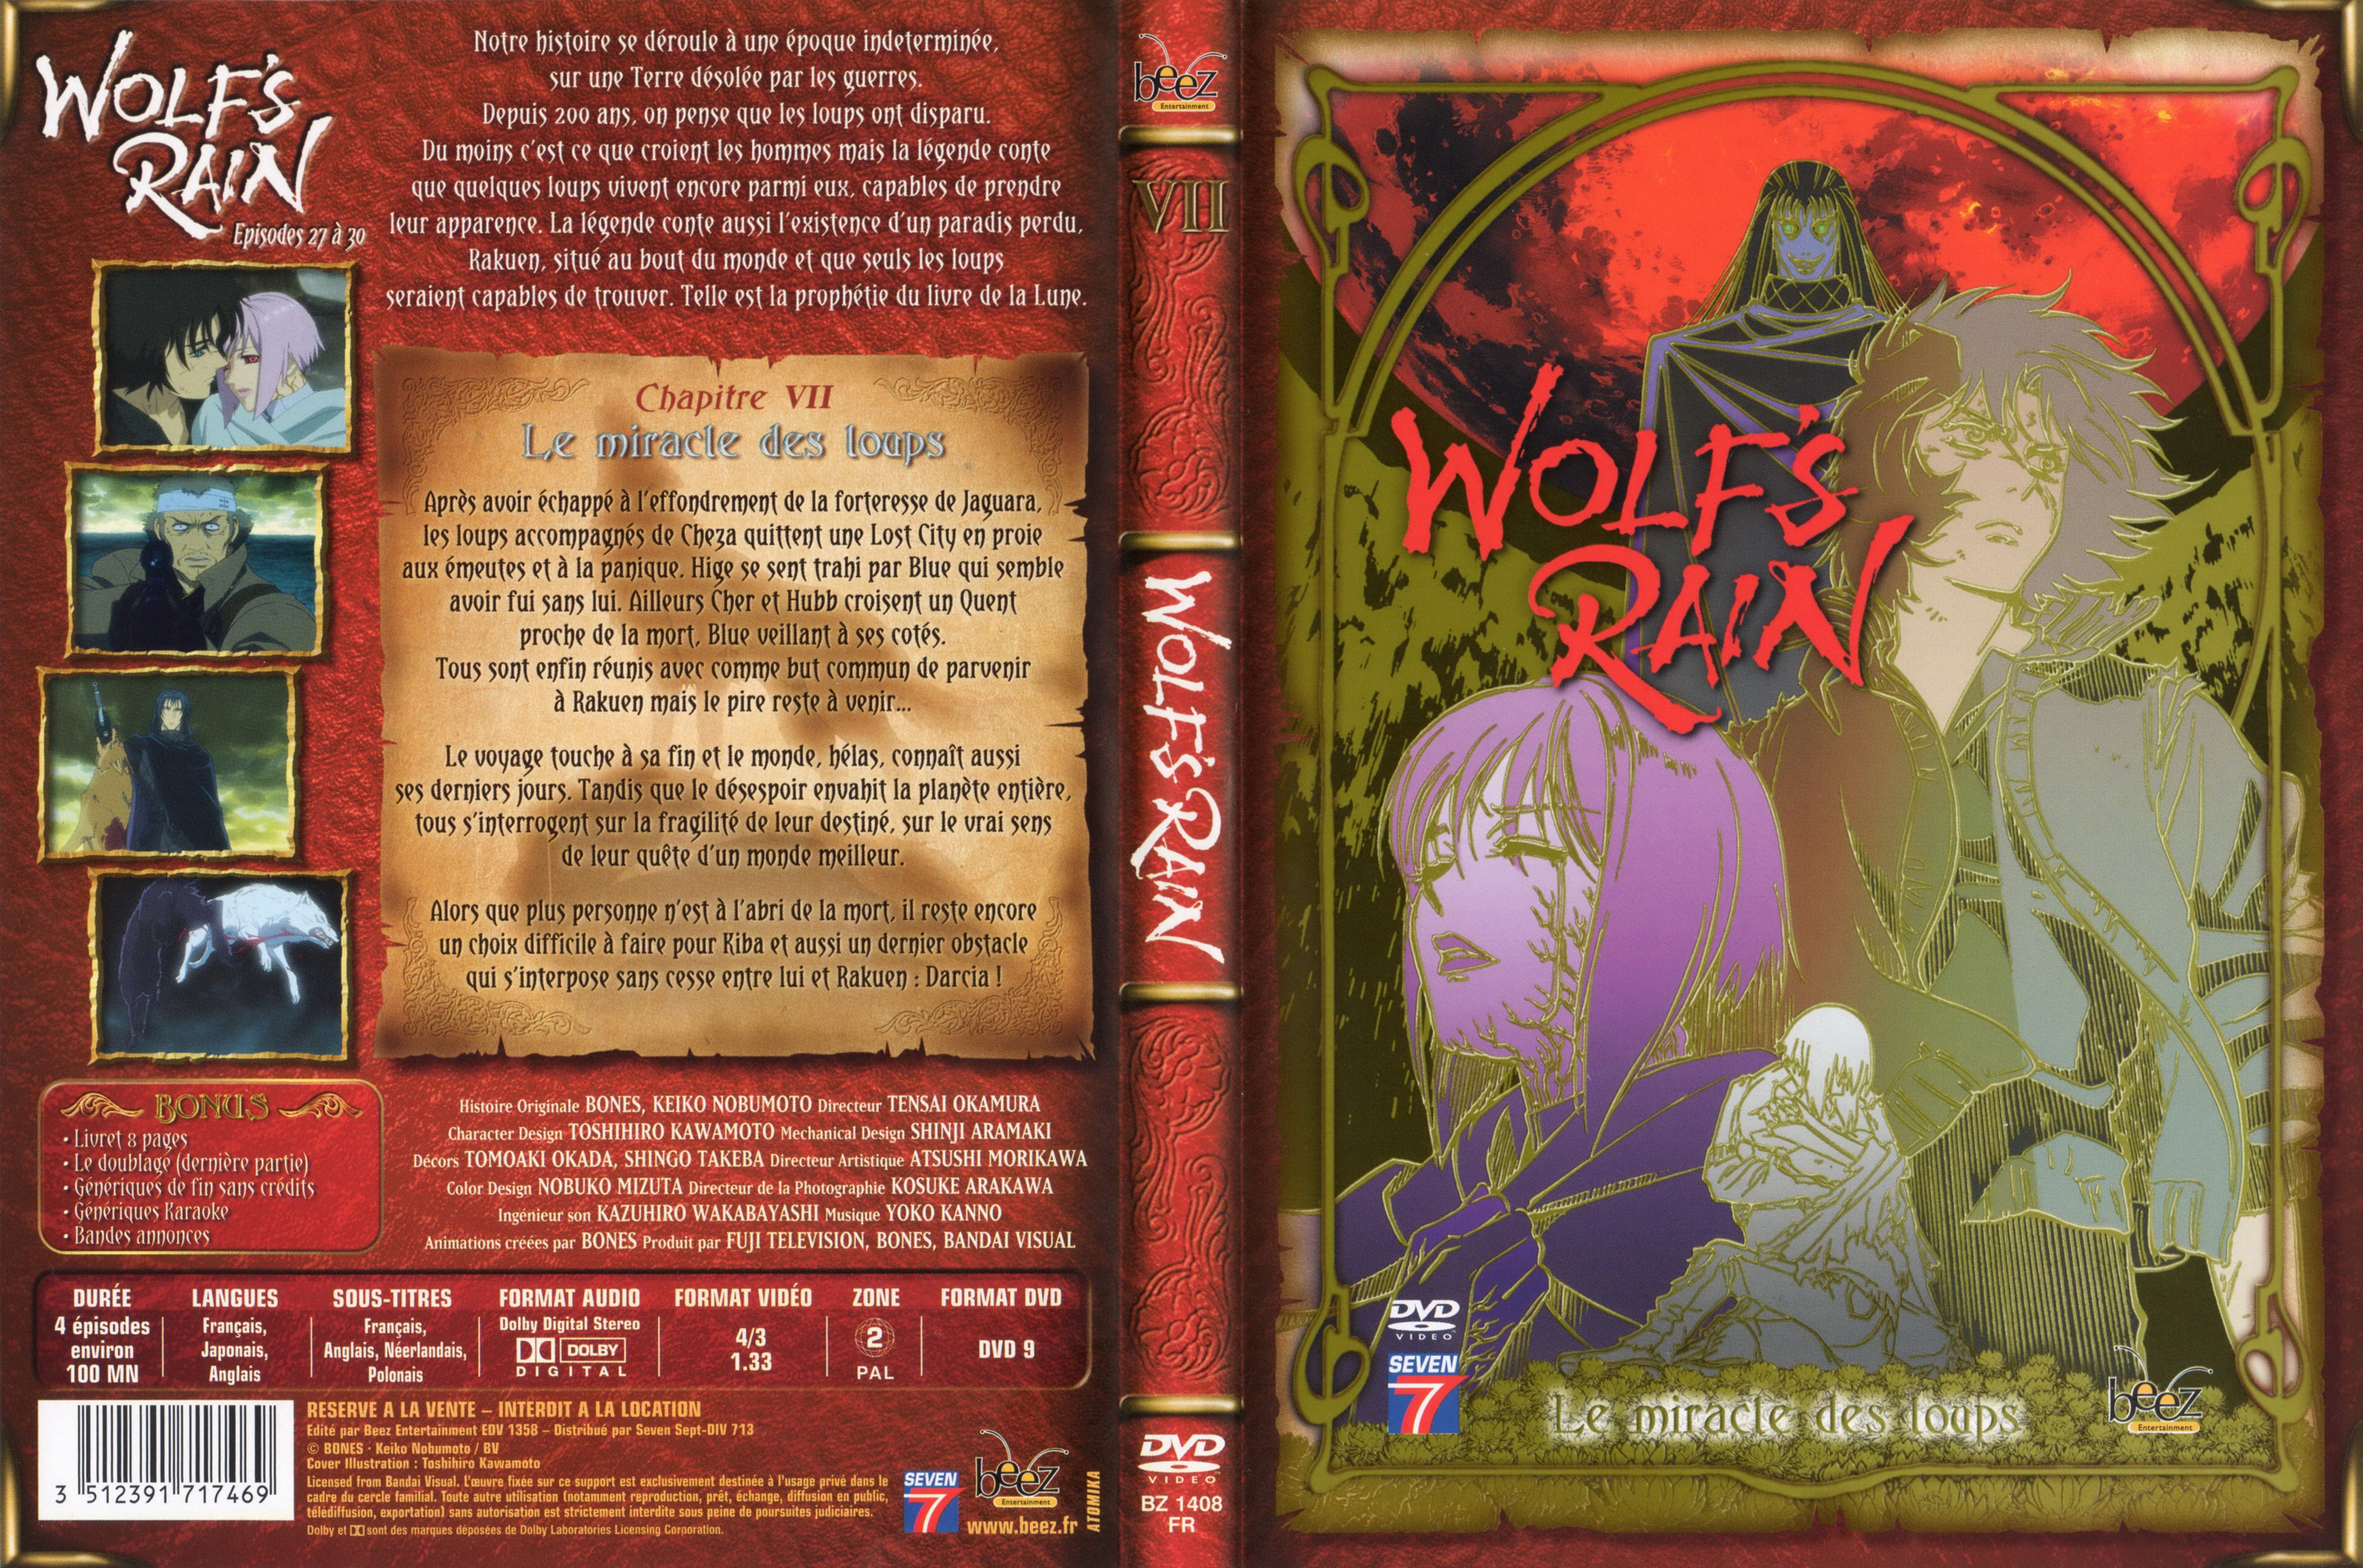 Jaquette DVD Wolf